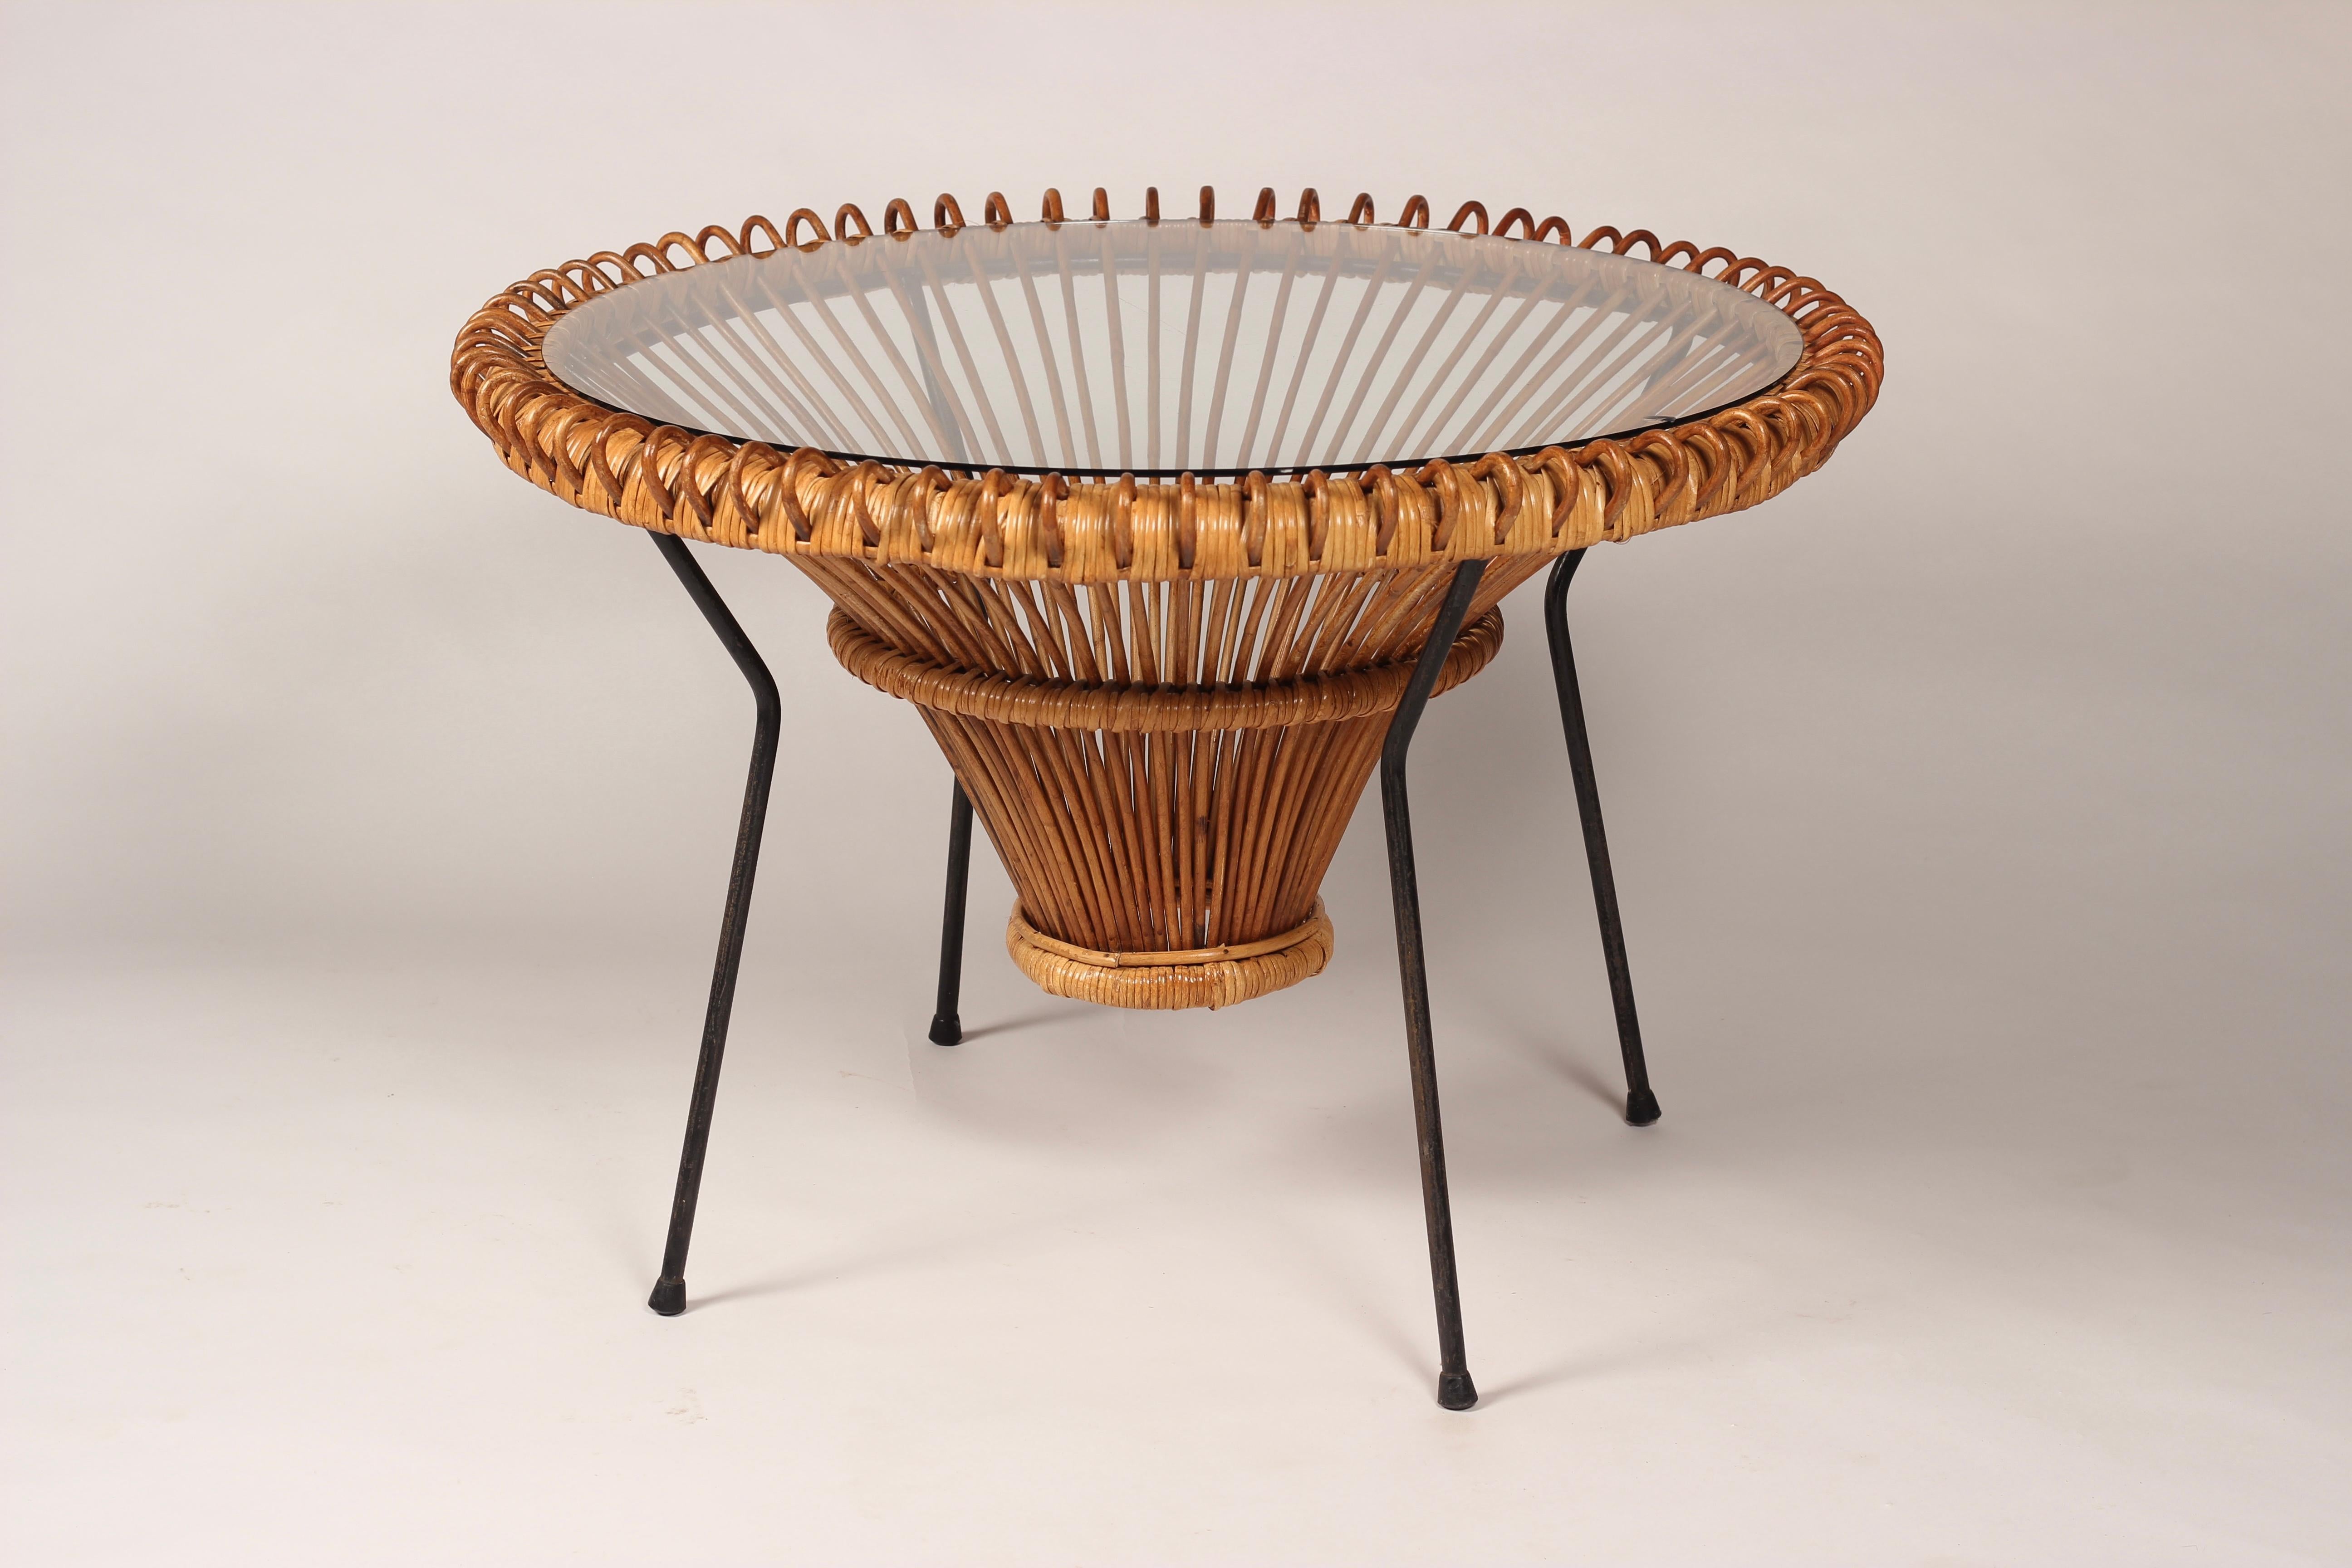 Italian Mid-Century Modern Rattan Side Table in the Style of Franco Albini, 1950’s